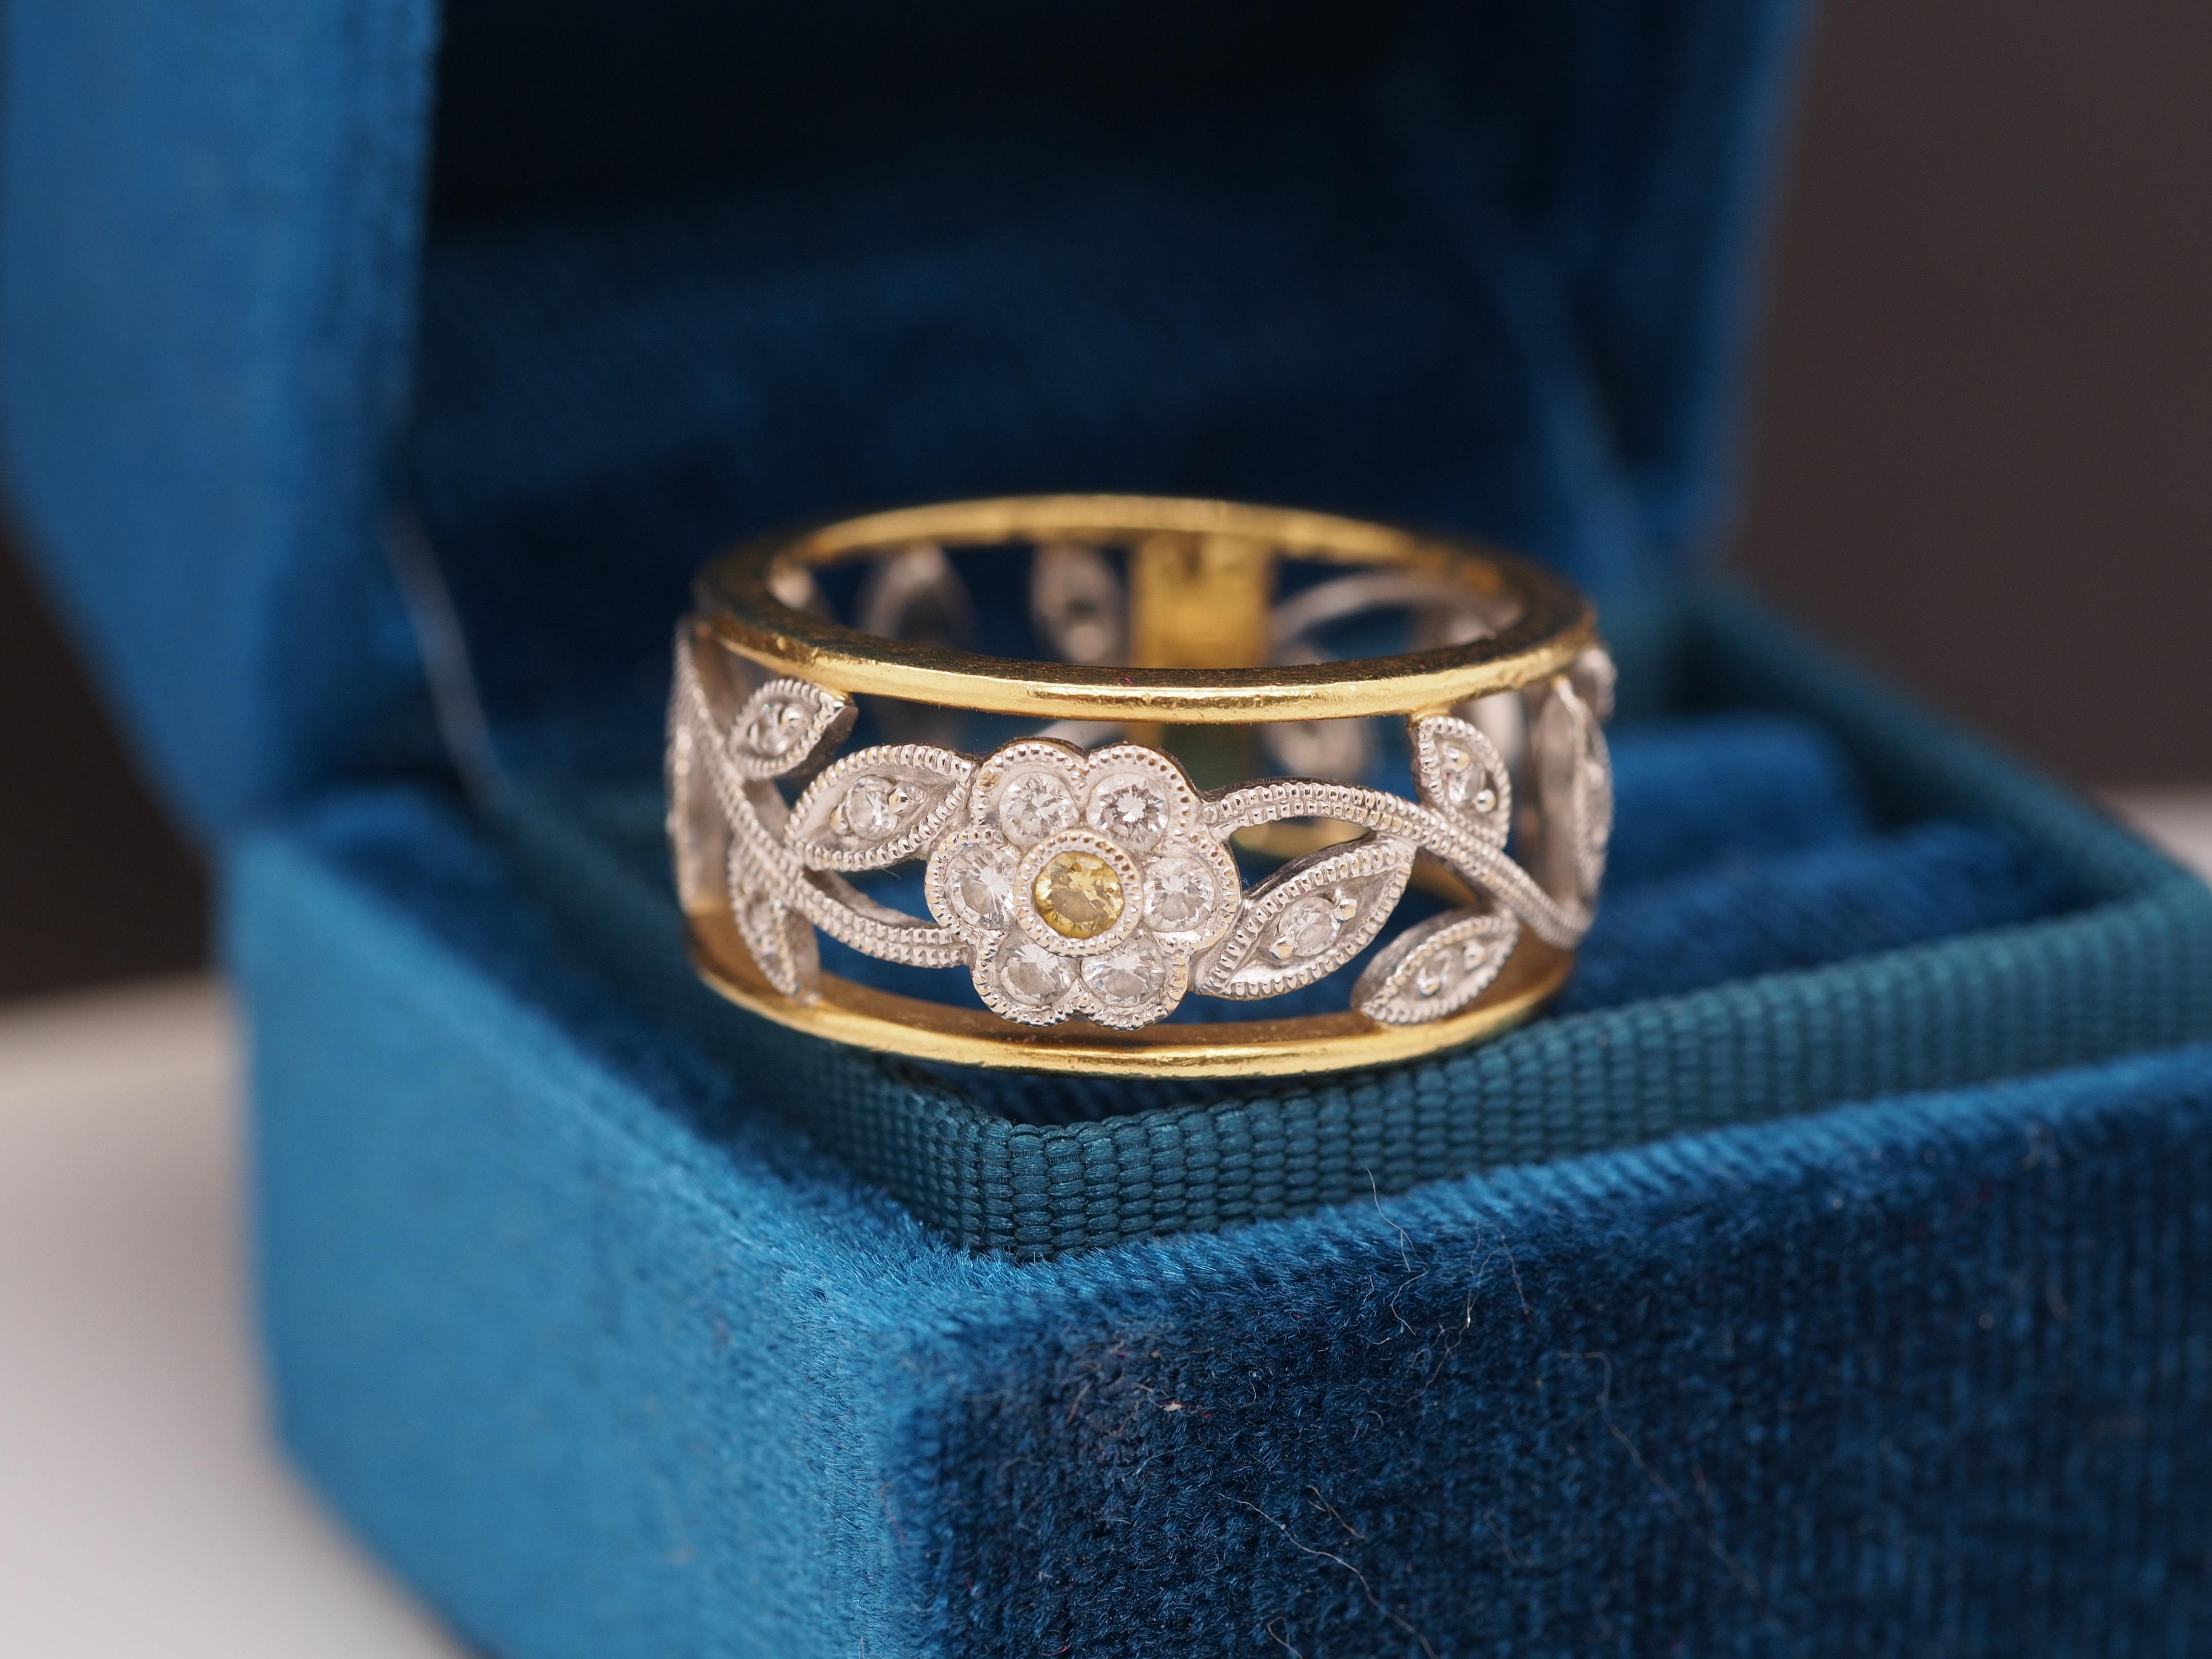 Year: 1990

Item Details:
Ring Size: 6.5
Metal Type: Two Tone 18K Yellow/White Gold [Hallmarked, and Tested]
Weight: 5.8 grams

Diamond Details: .40cttw

Color: F

Clarity: VS

Band Width: mm
Condition: Excellent

Price: $1250